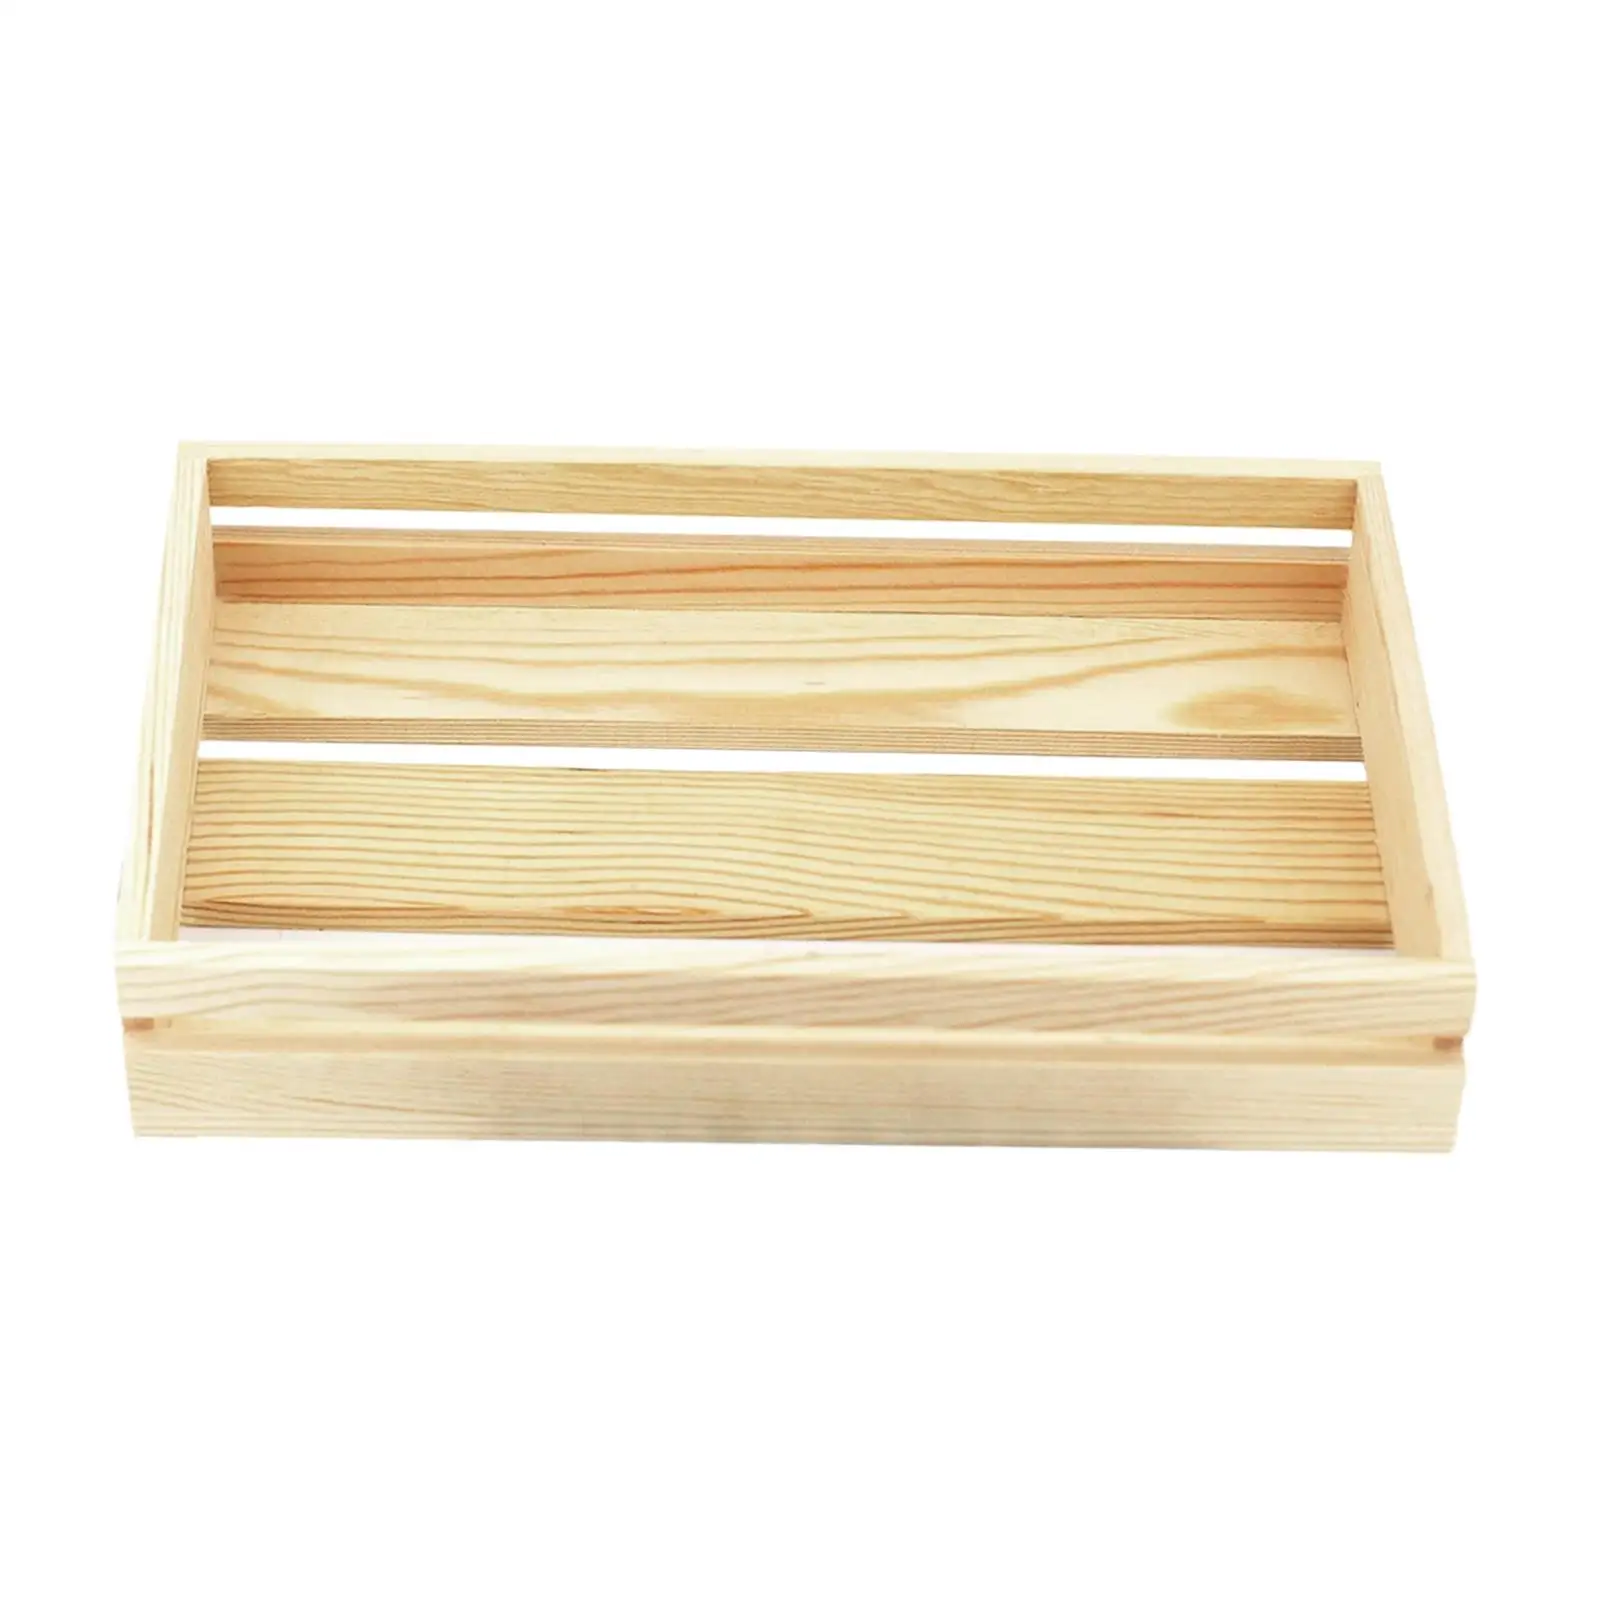 Soap Tray Keep Soap Dried Hollow Soap Container Box Portable Soap Holder Wooden Shelf Soap Dish for Kitchen Accessories